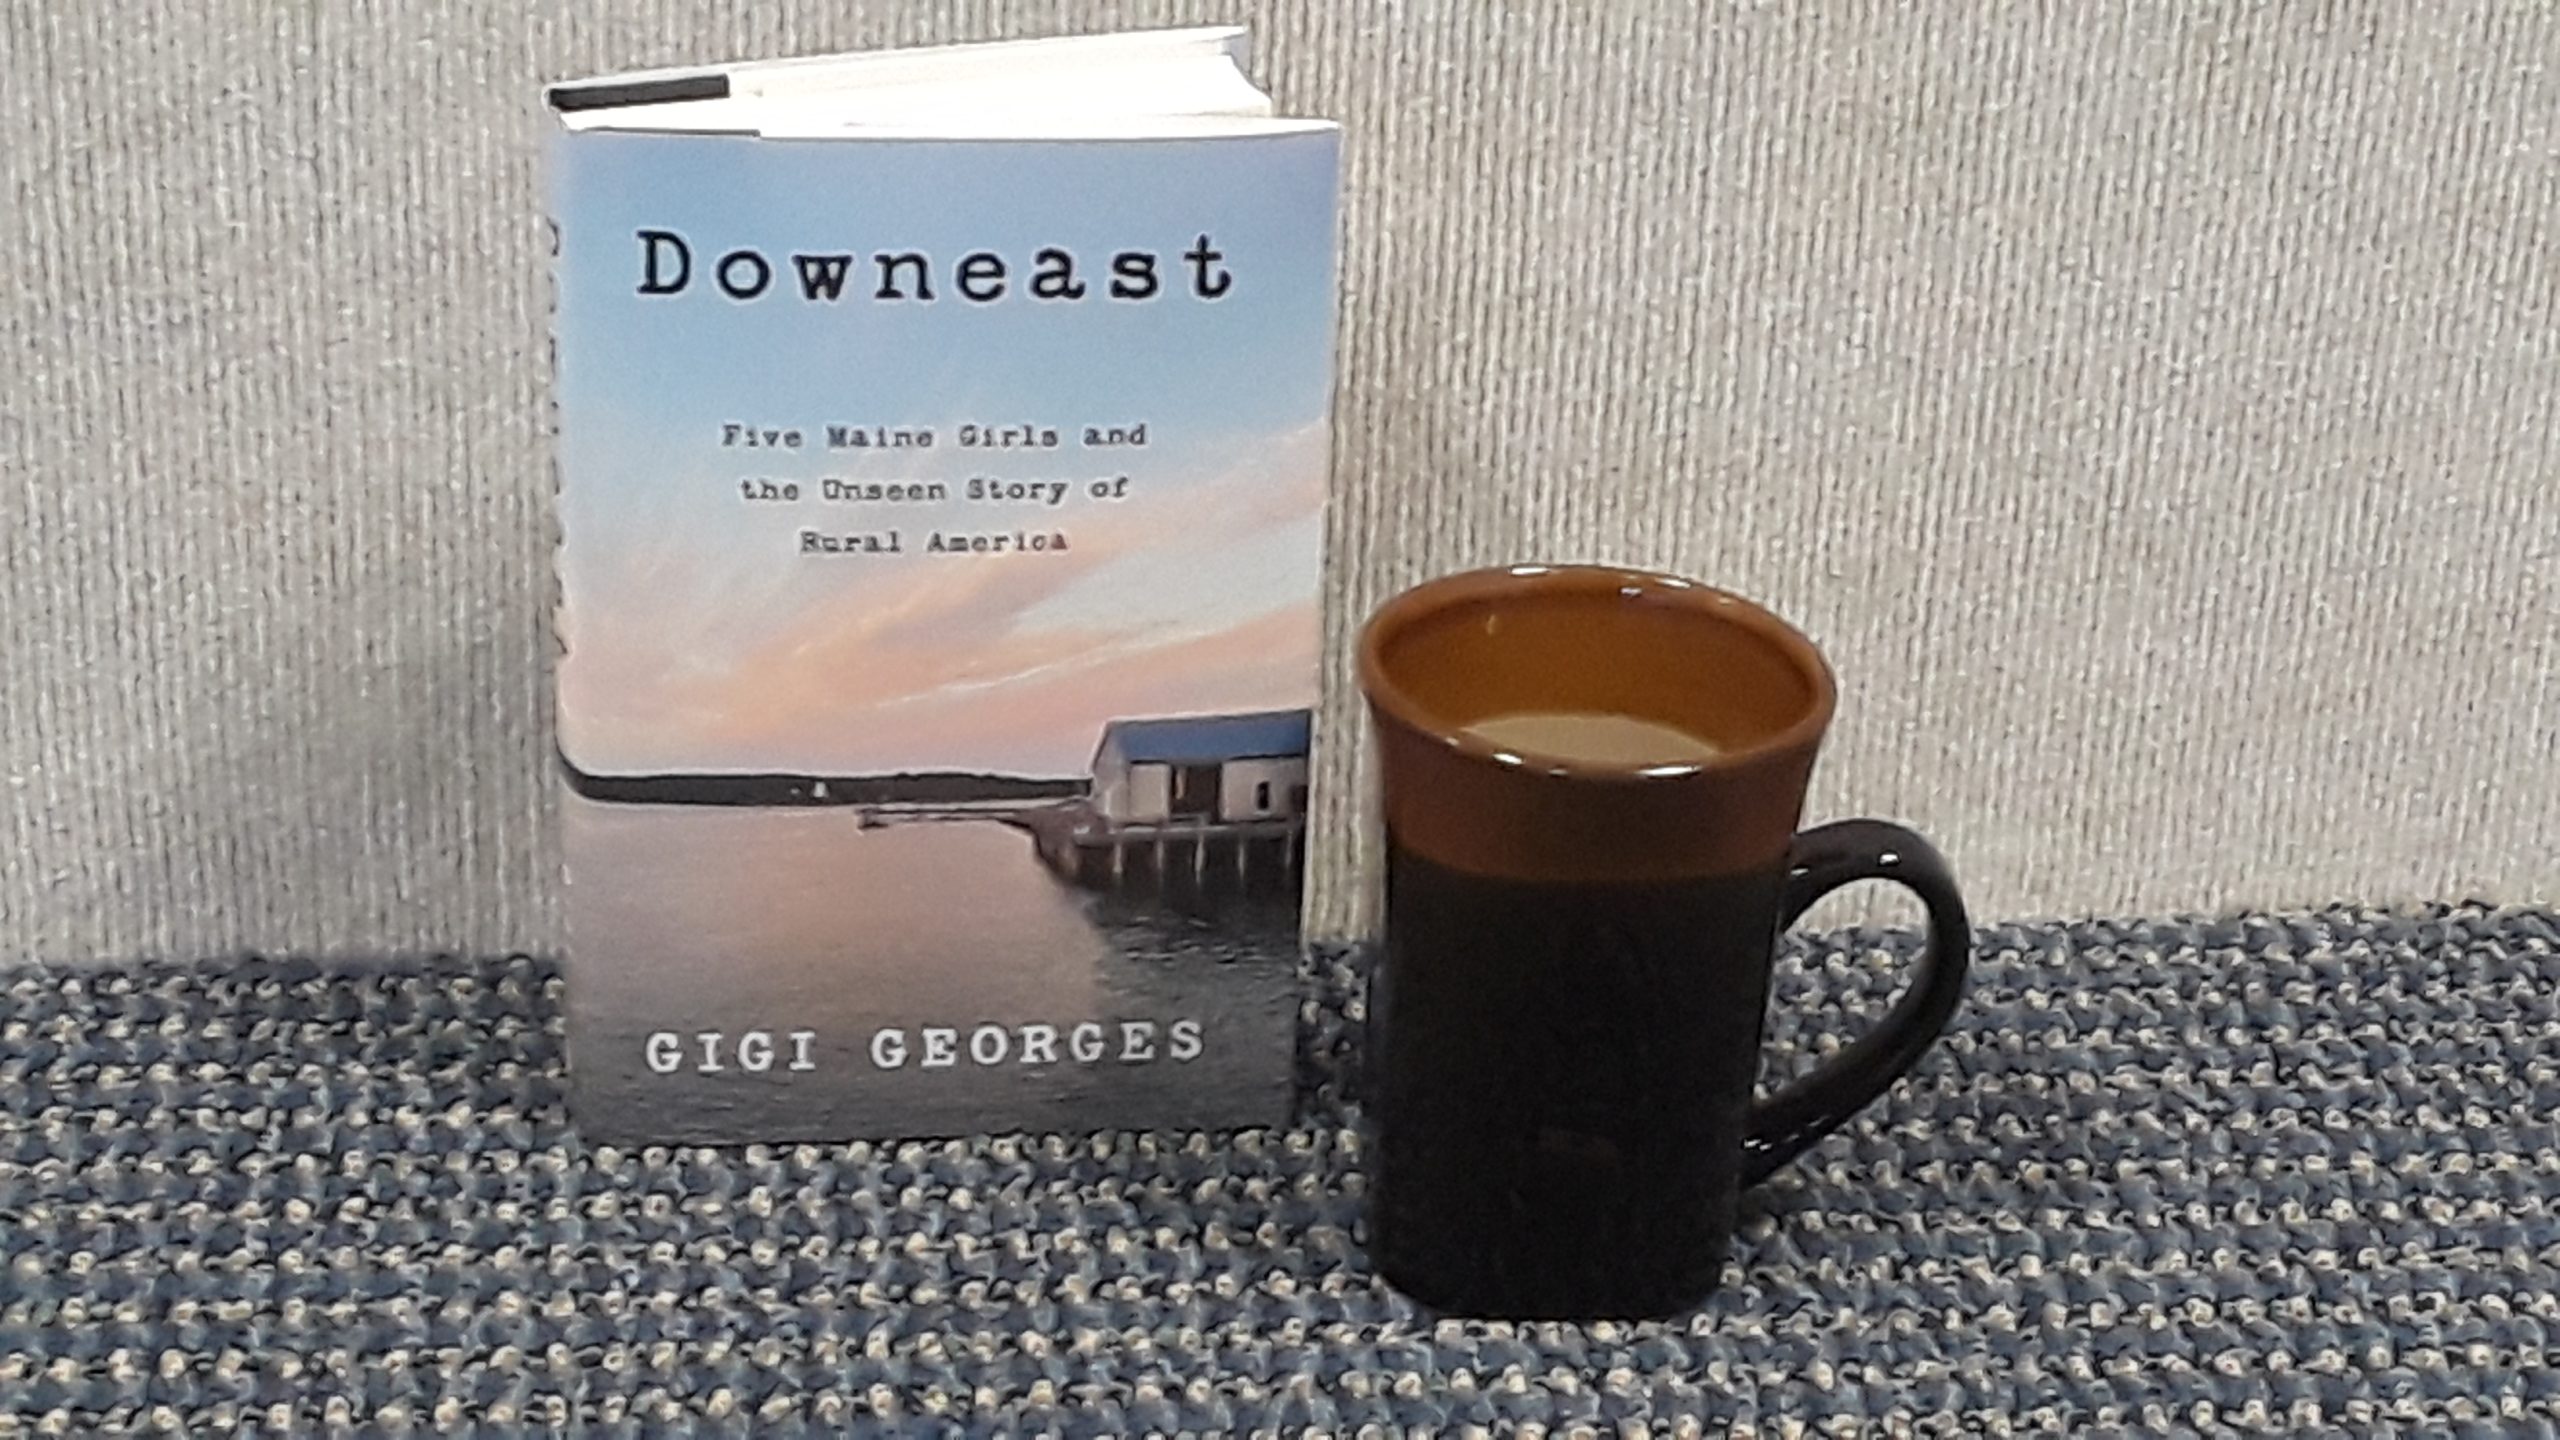 ‘Downeast’ Five Maine Girls and the Unseen Story of Rural America